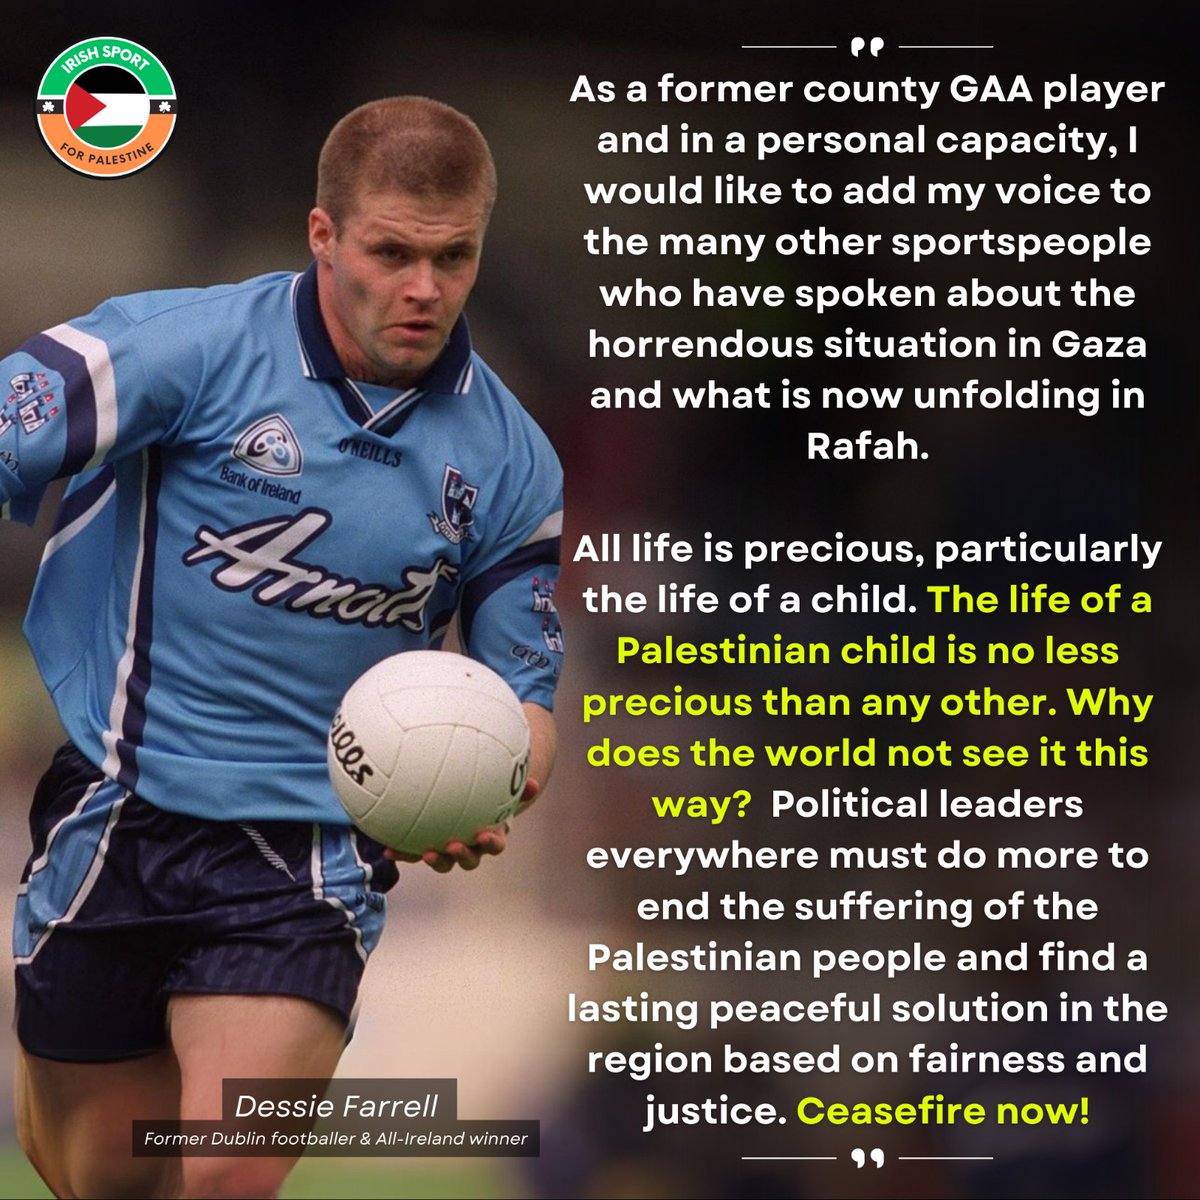 As a former county GAA player and in a personal capacity, I would like to add my voice to the many other sports people who have spoken about the horrendous situation in Gaza and what is now unfolding in Rafah. All life is precious, particularly the life of a child. The life of a